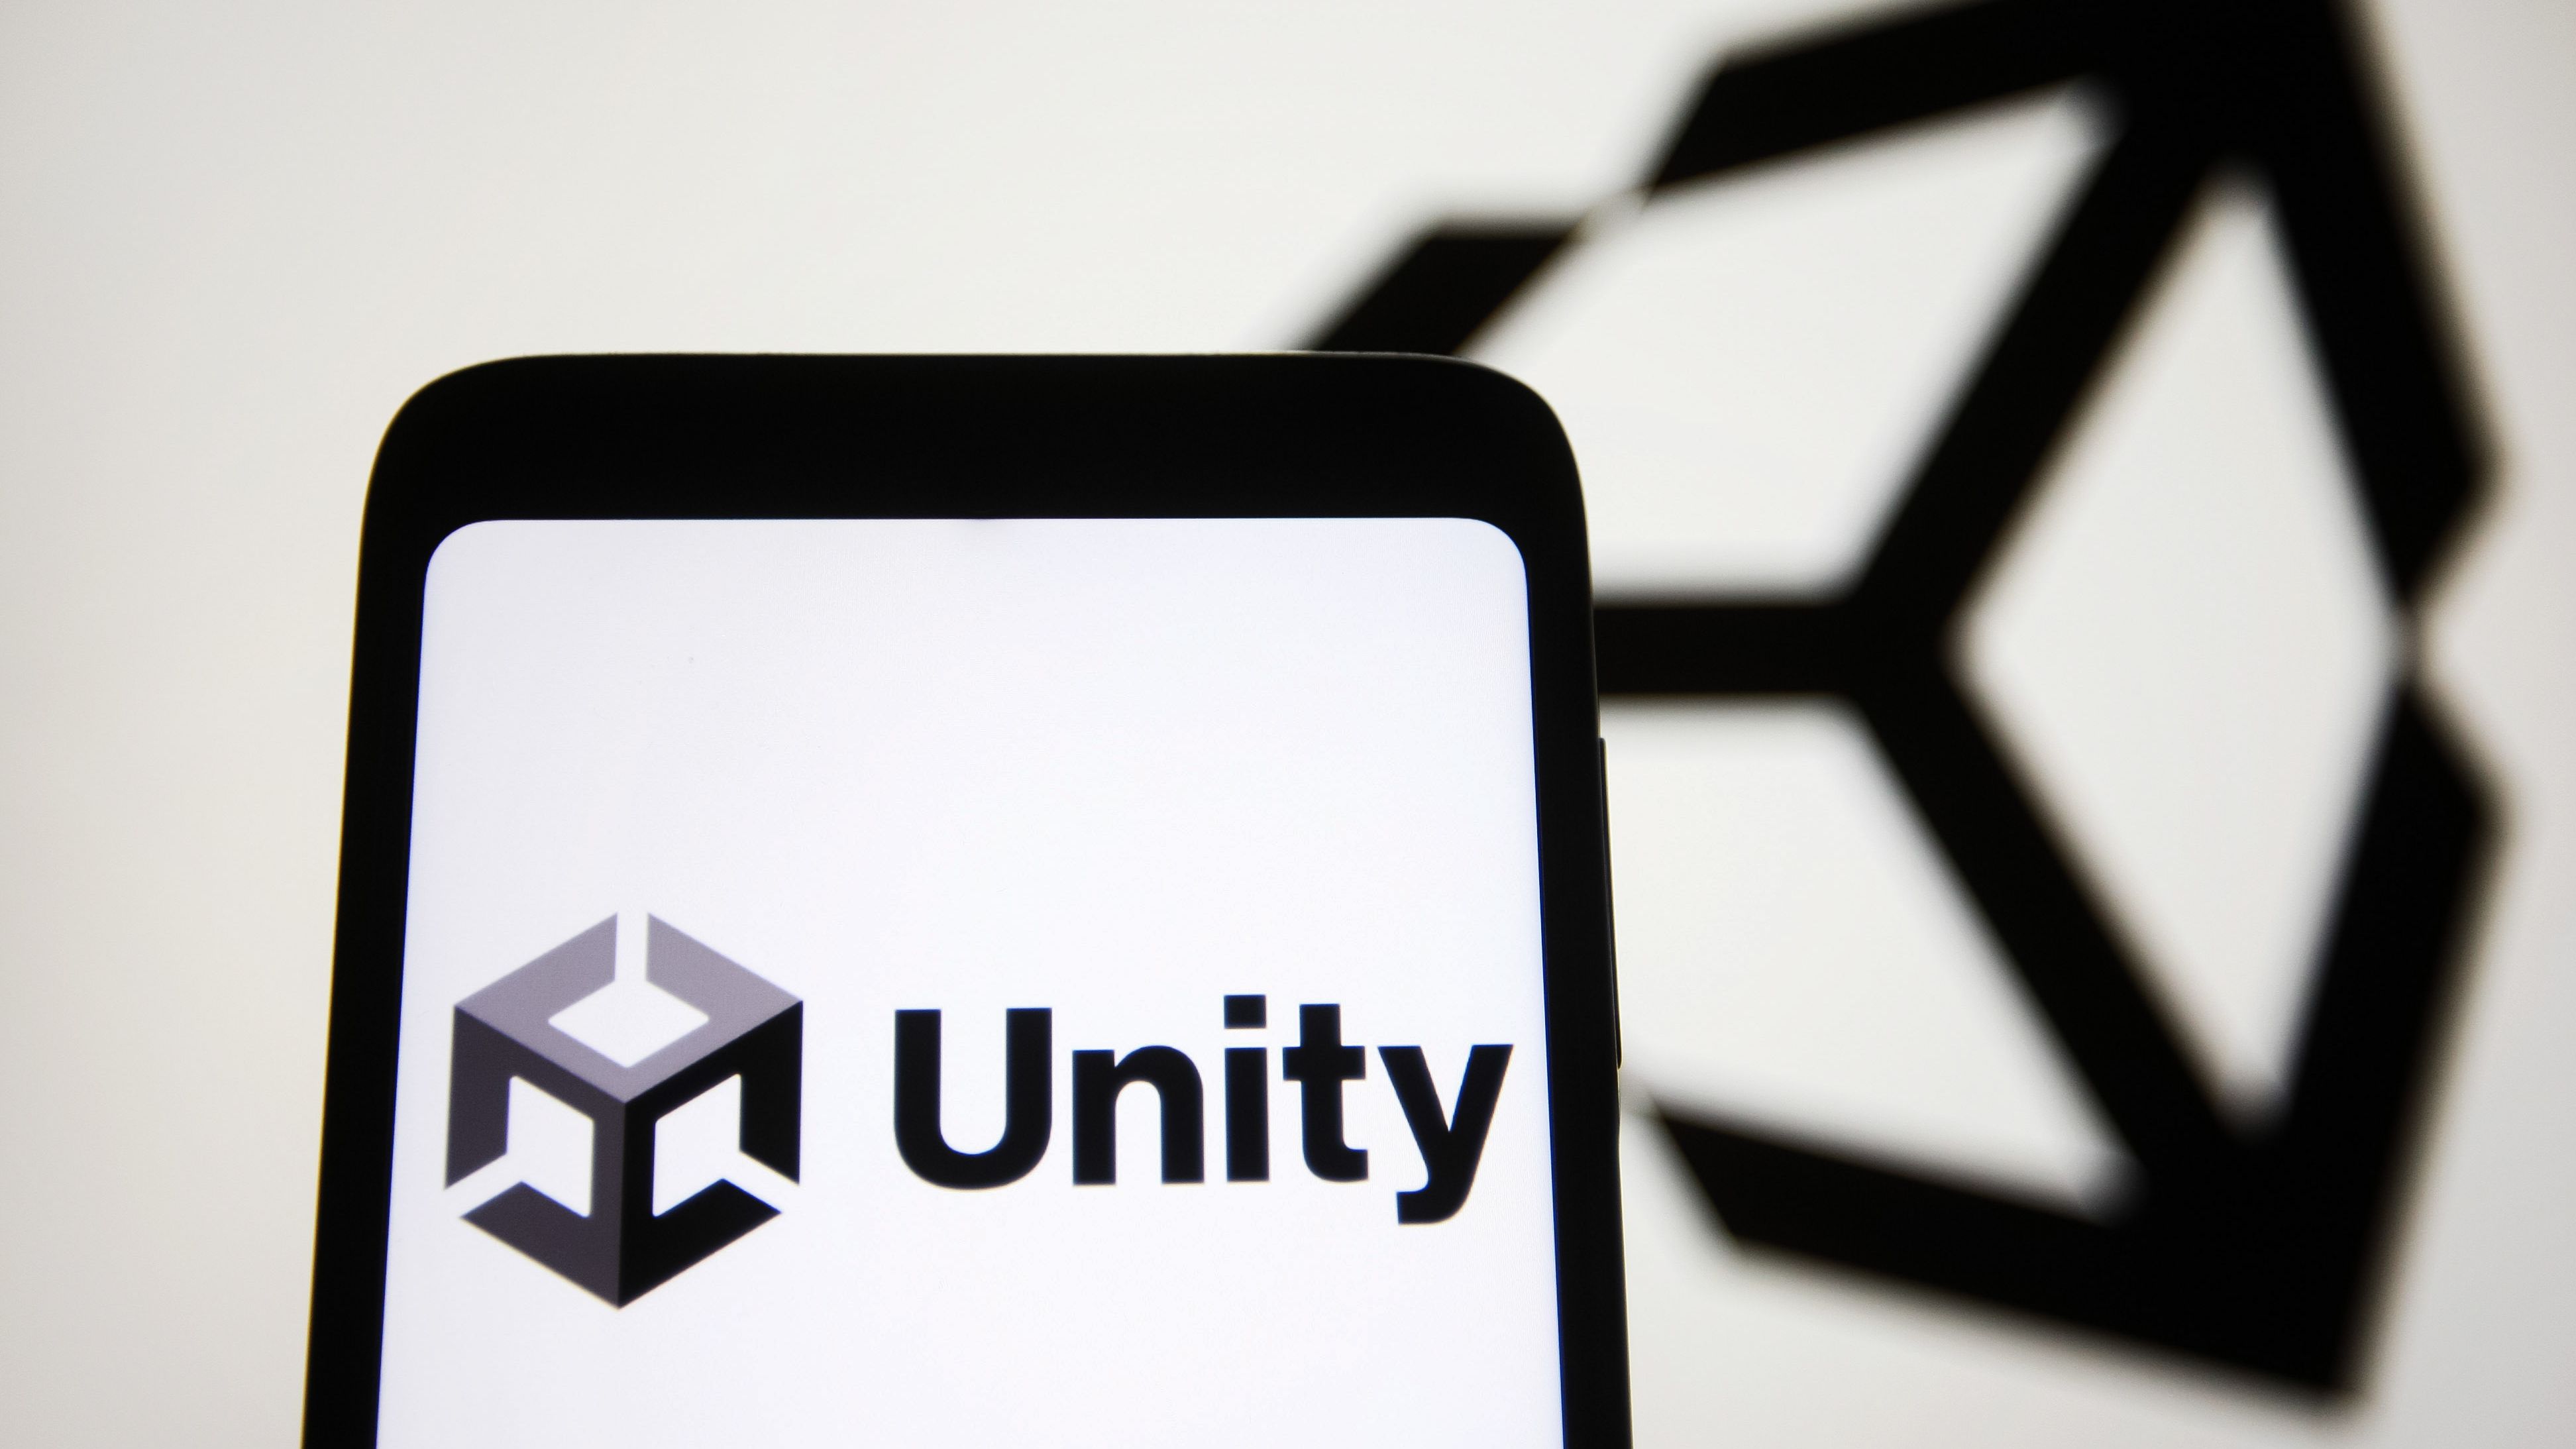  Unity manager publicly states company is 'out of touch', is fired within three hours 